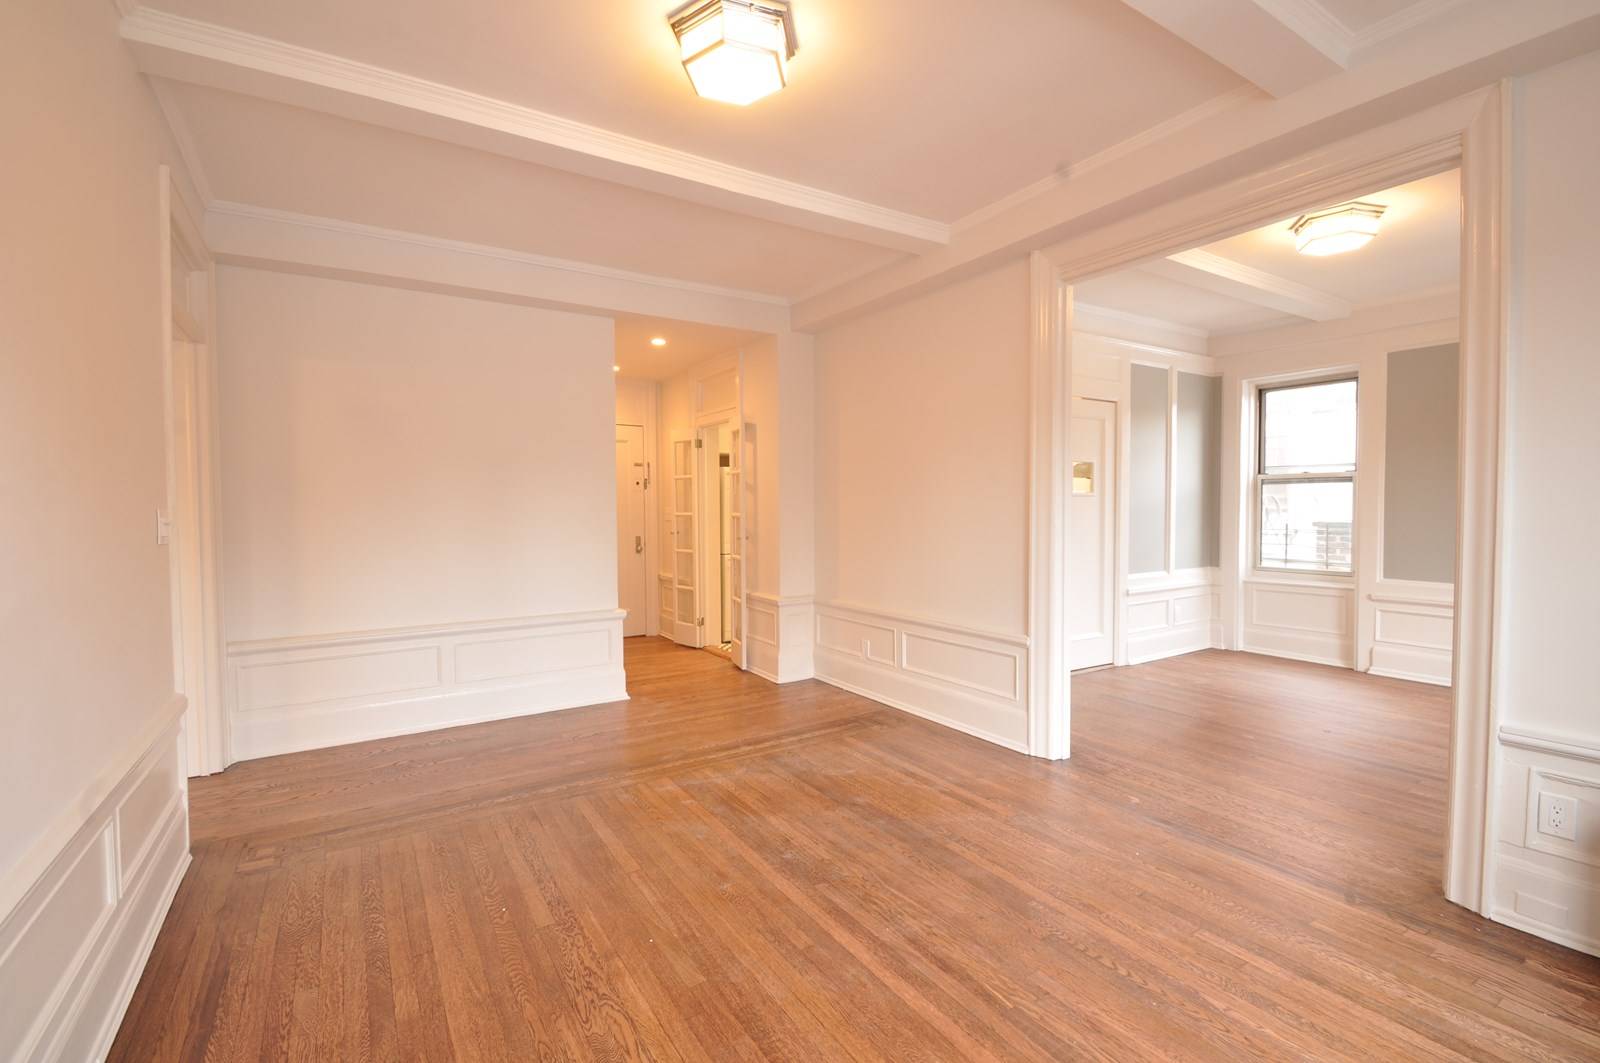 NO FEE! SUNNY 6 IN PS 6! RARE FIND! PRE WAR RENTAL 3 BED / 2 BATH WITH W/D! PET FRIENDLY!